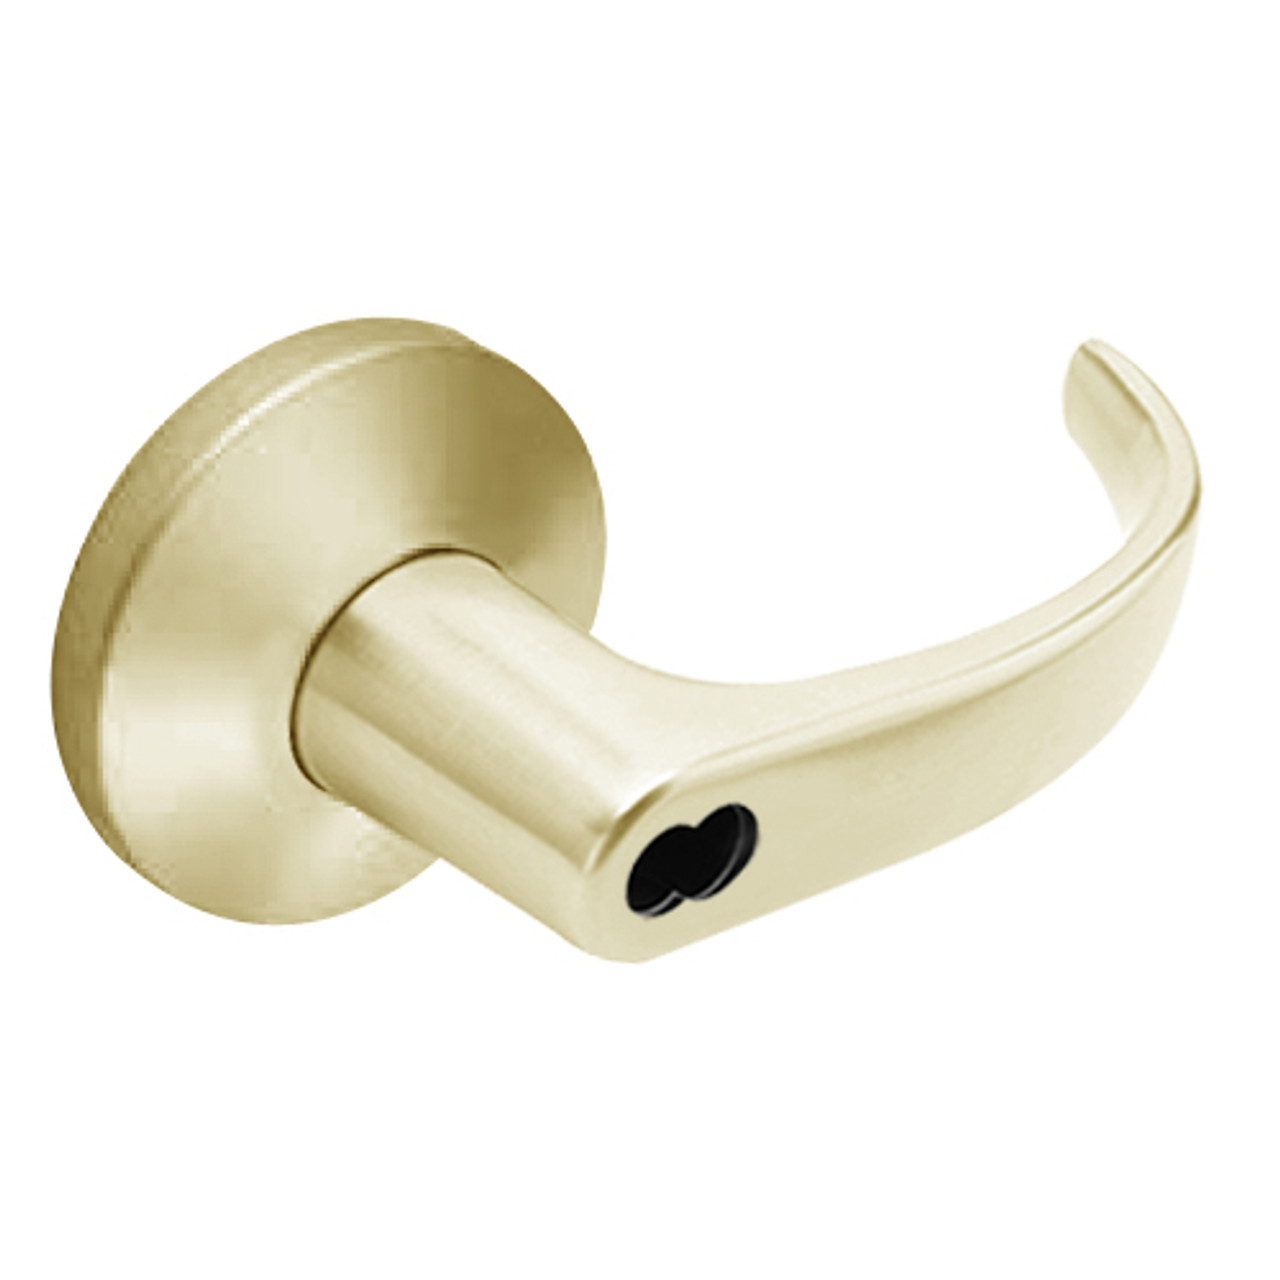 9K37YR14KSTK606 Best 9K Series Special Function Cylindrical Lever Locks with Curved with Return Lever Design Accept 7 Pin Best Core in Satin Brass